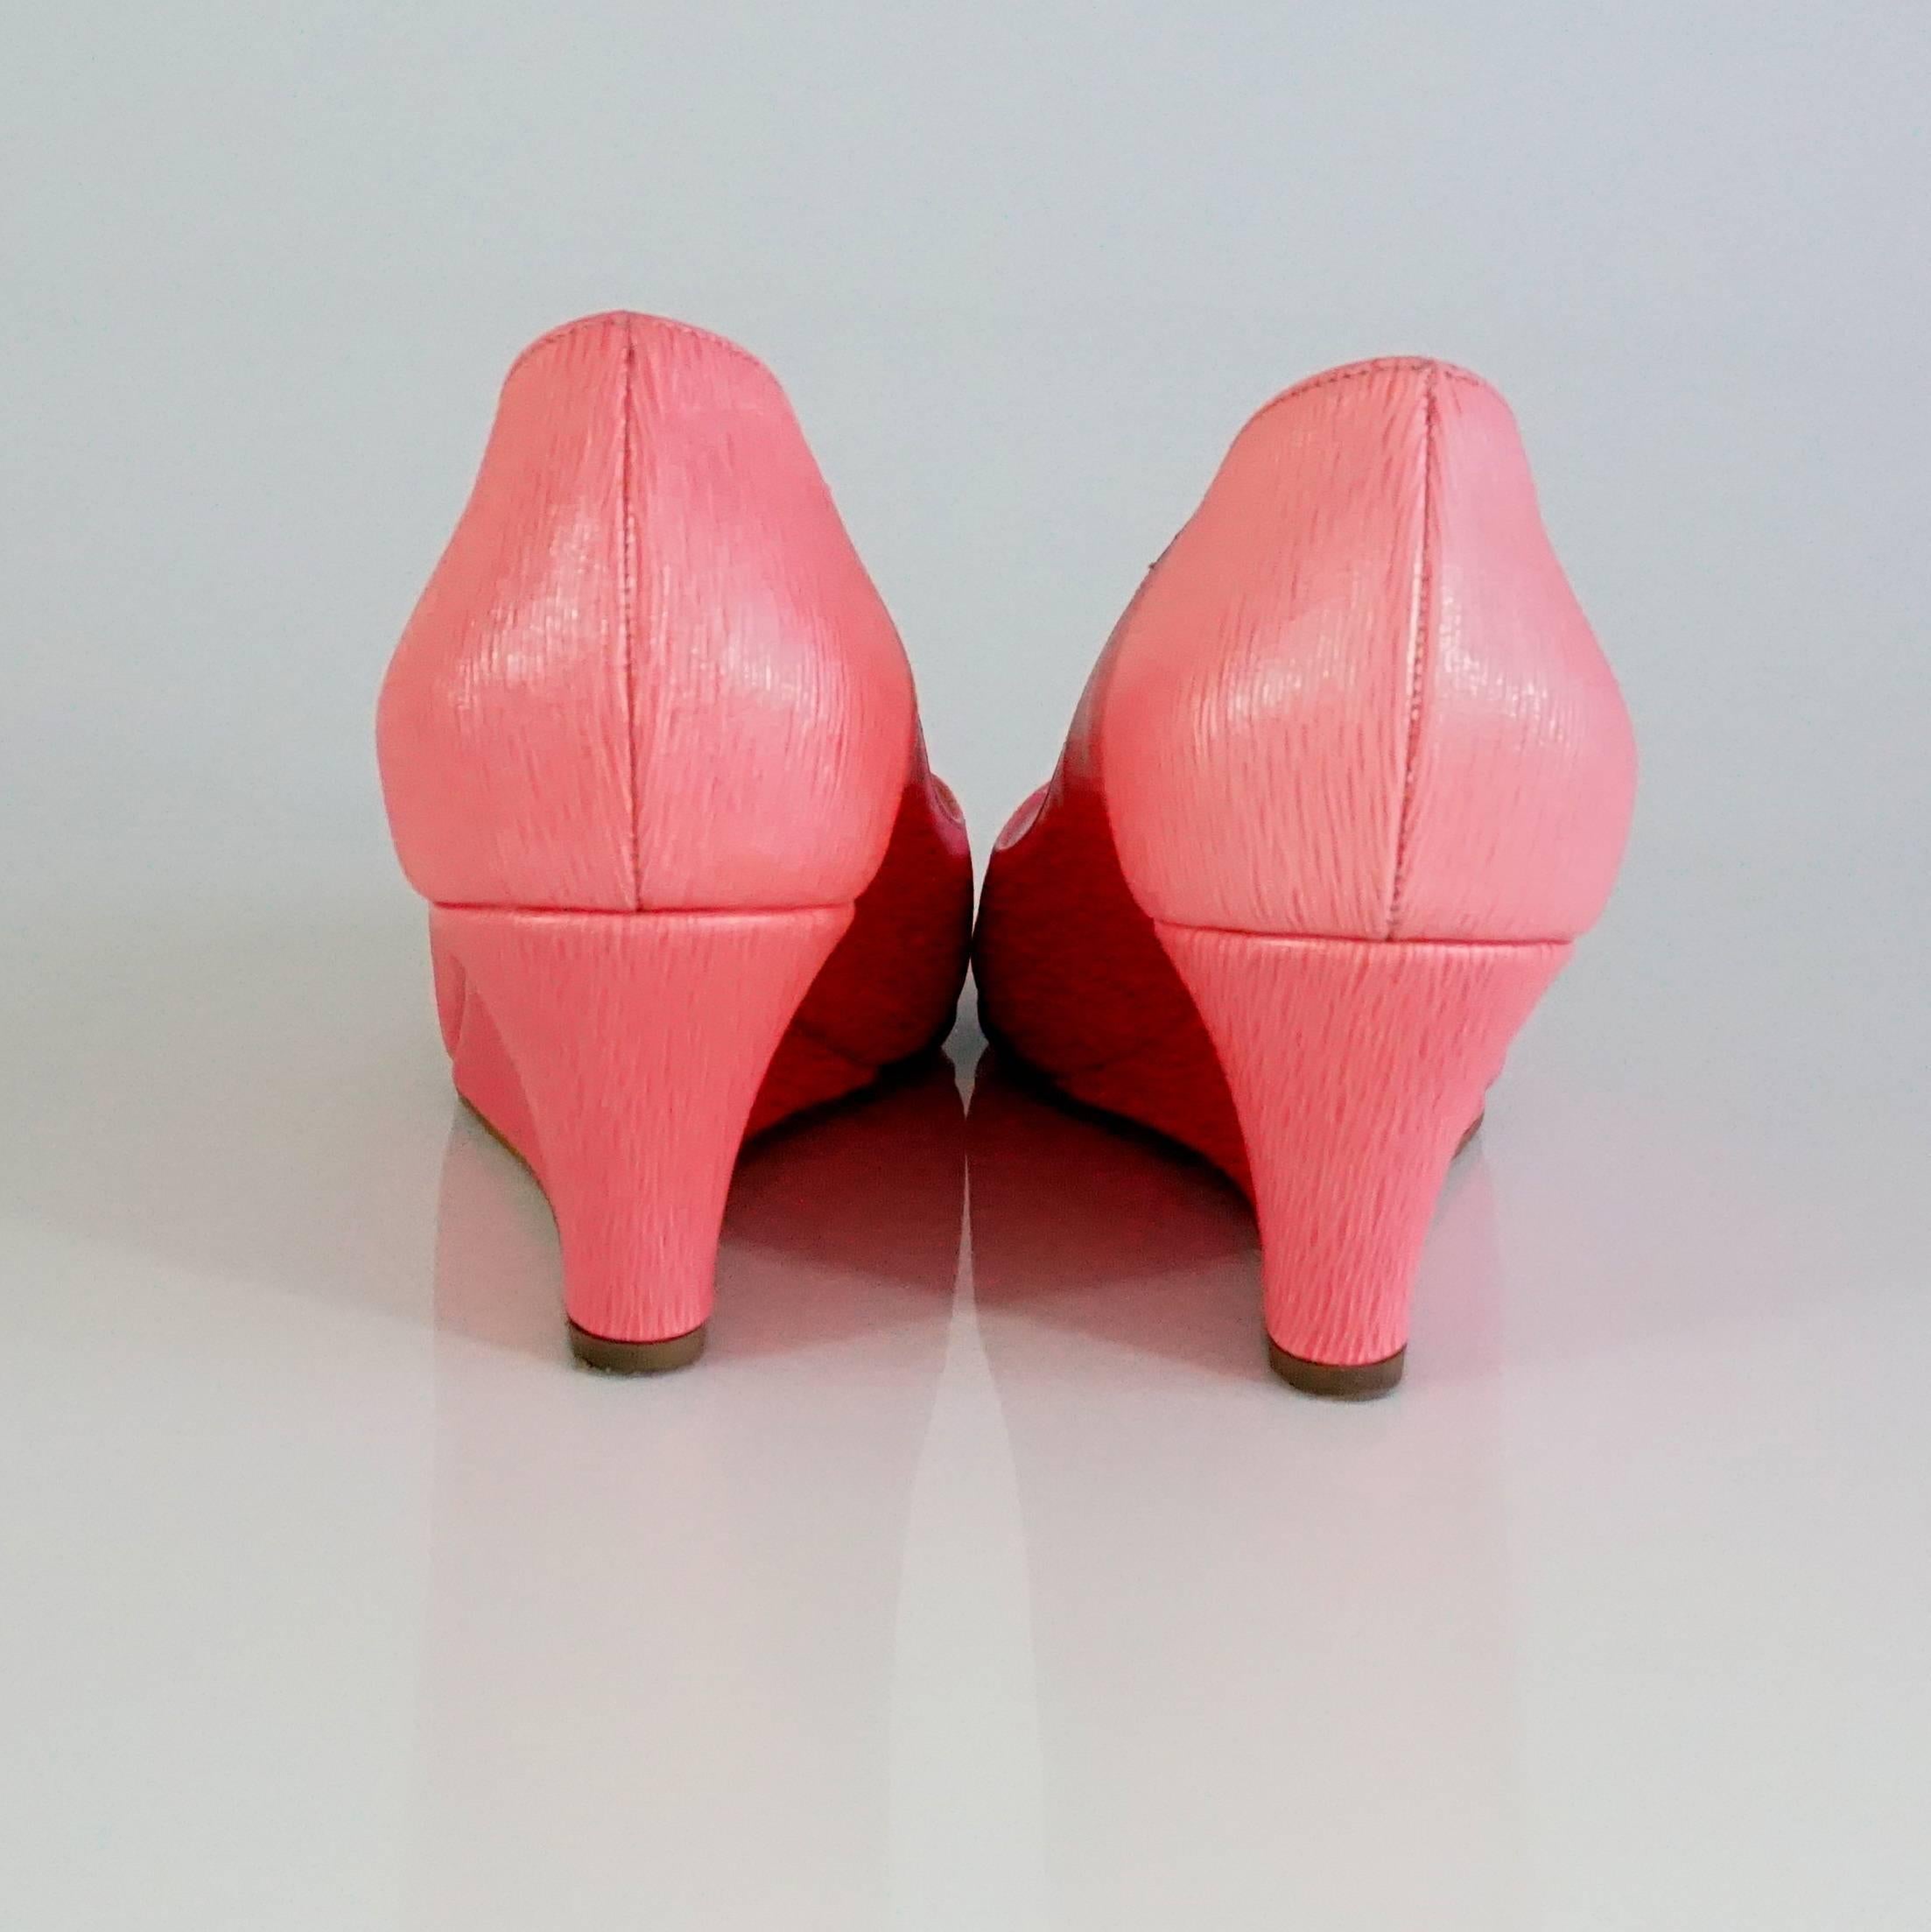 Women's Sergio Rossi Pink Epi Leather Open Toe Wedges - 36.5